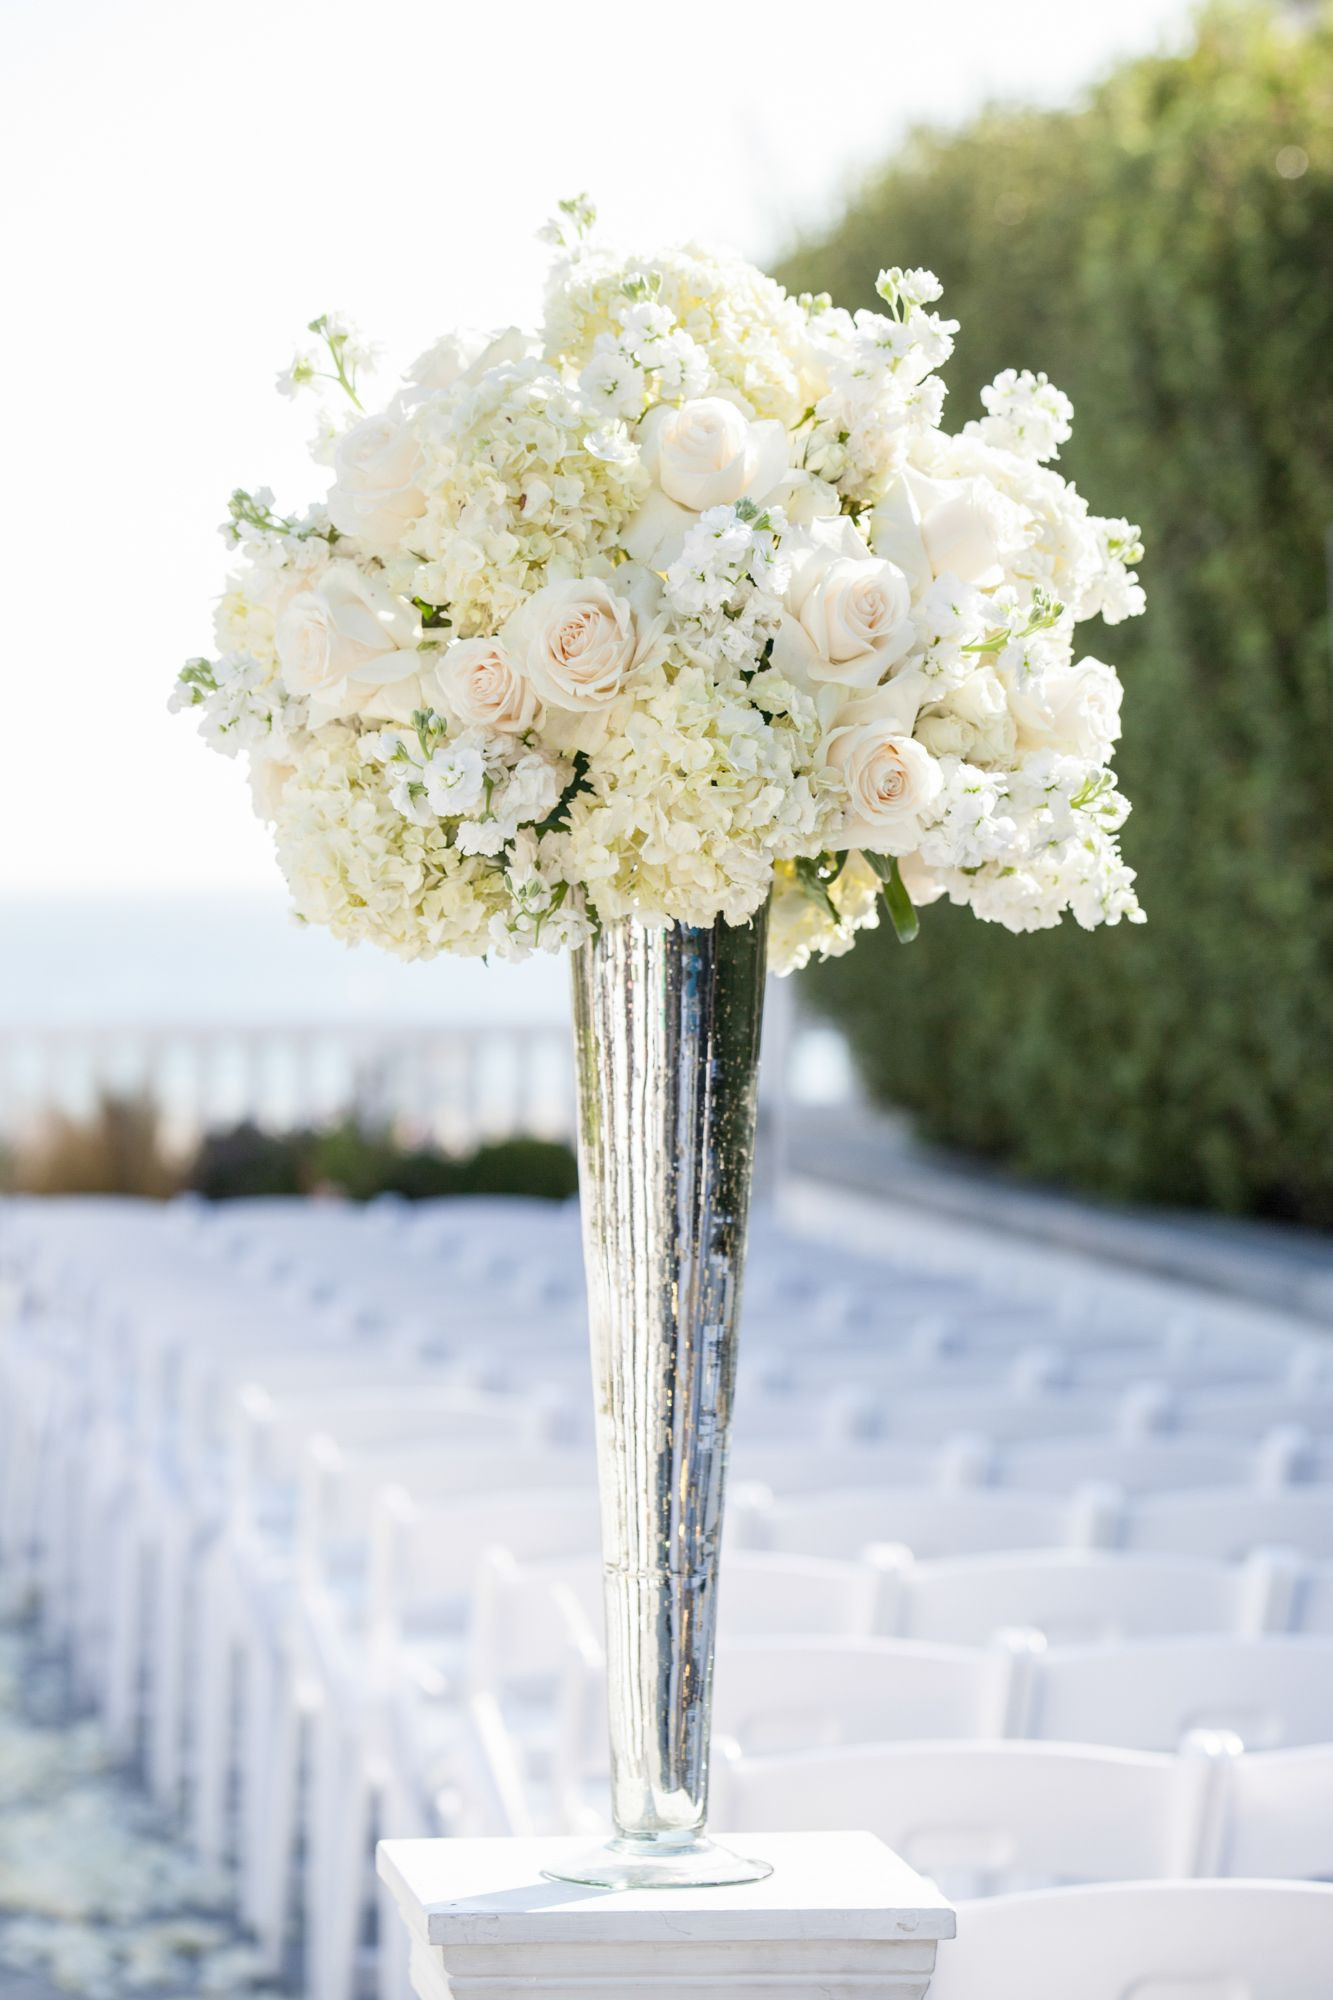 23 Recommended Silver Vase orchids 2024 free download silver vase orchids of white and silver vase pics xh vases silver vase chinese export 1i 0d with white and silver vase images tall white rose and hydrangea centerpiece in a silver lined vase